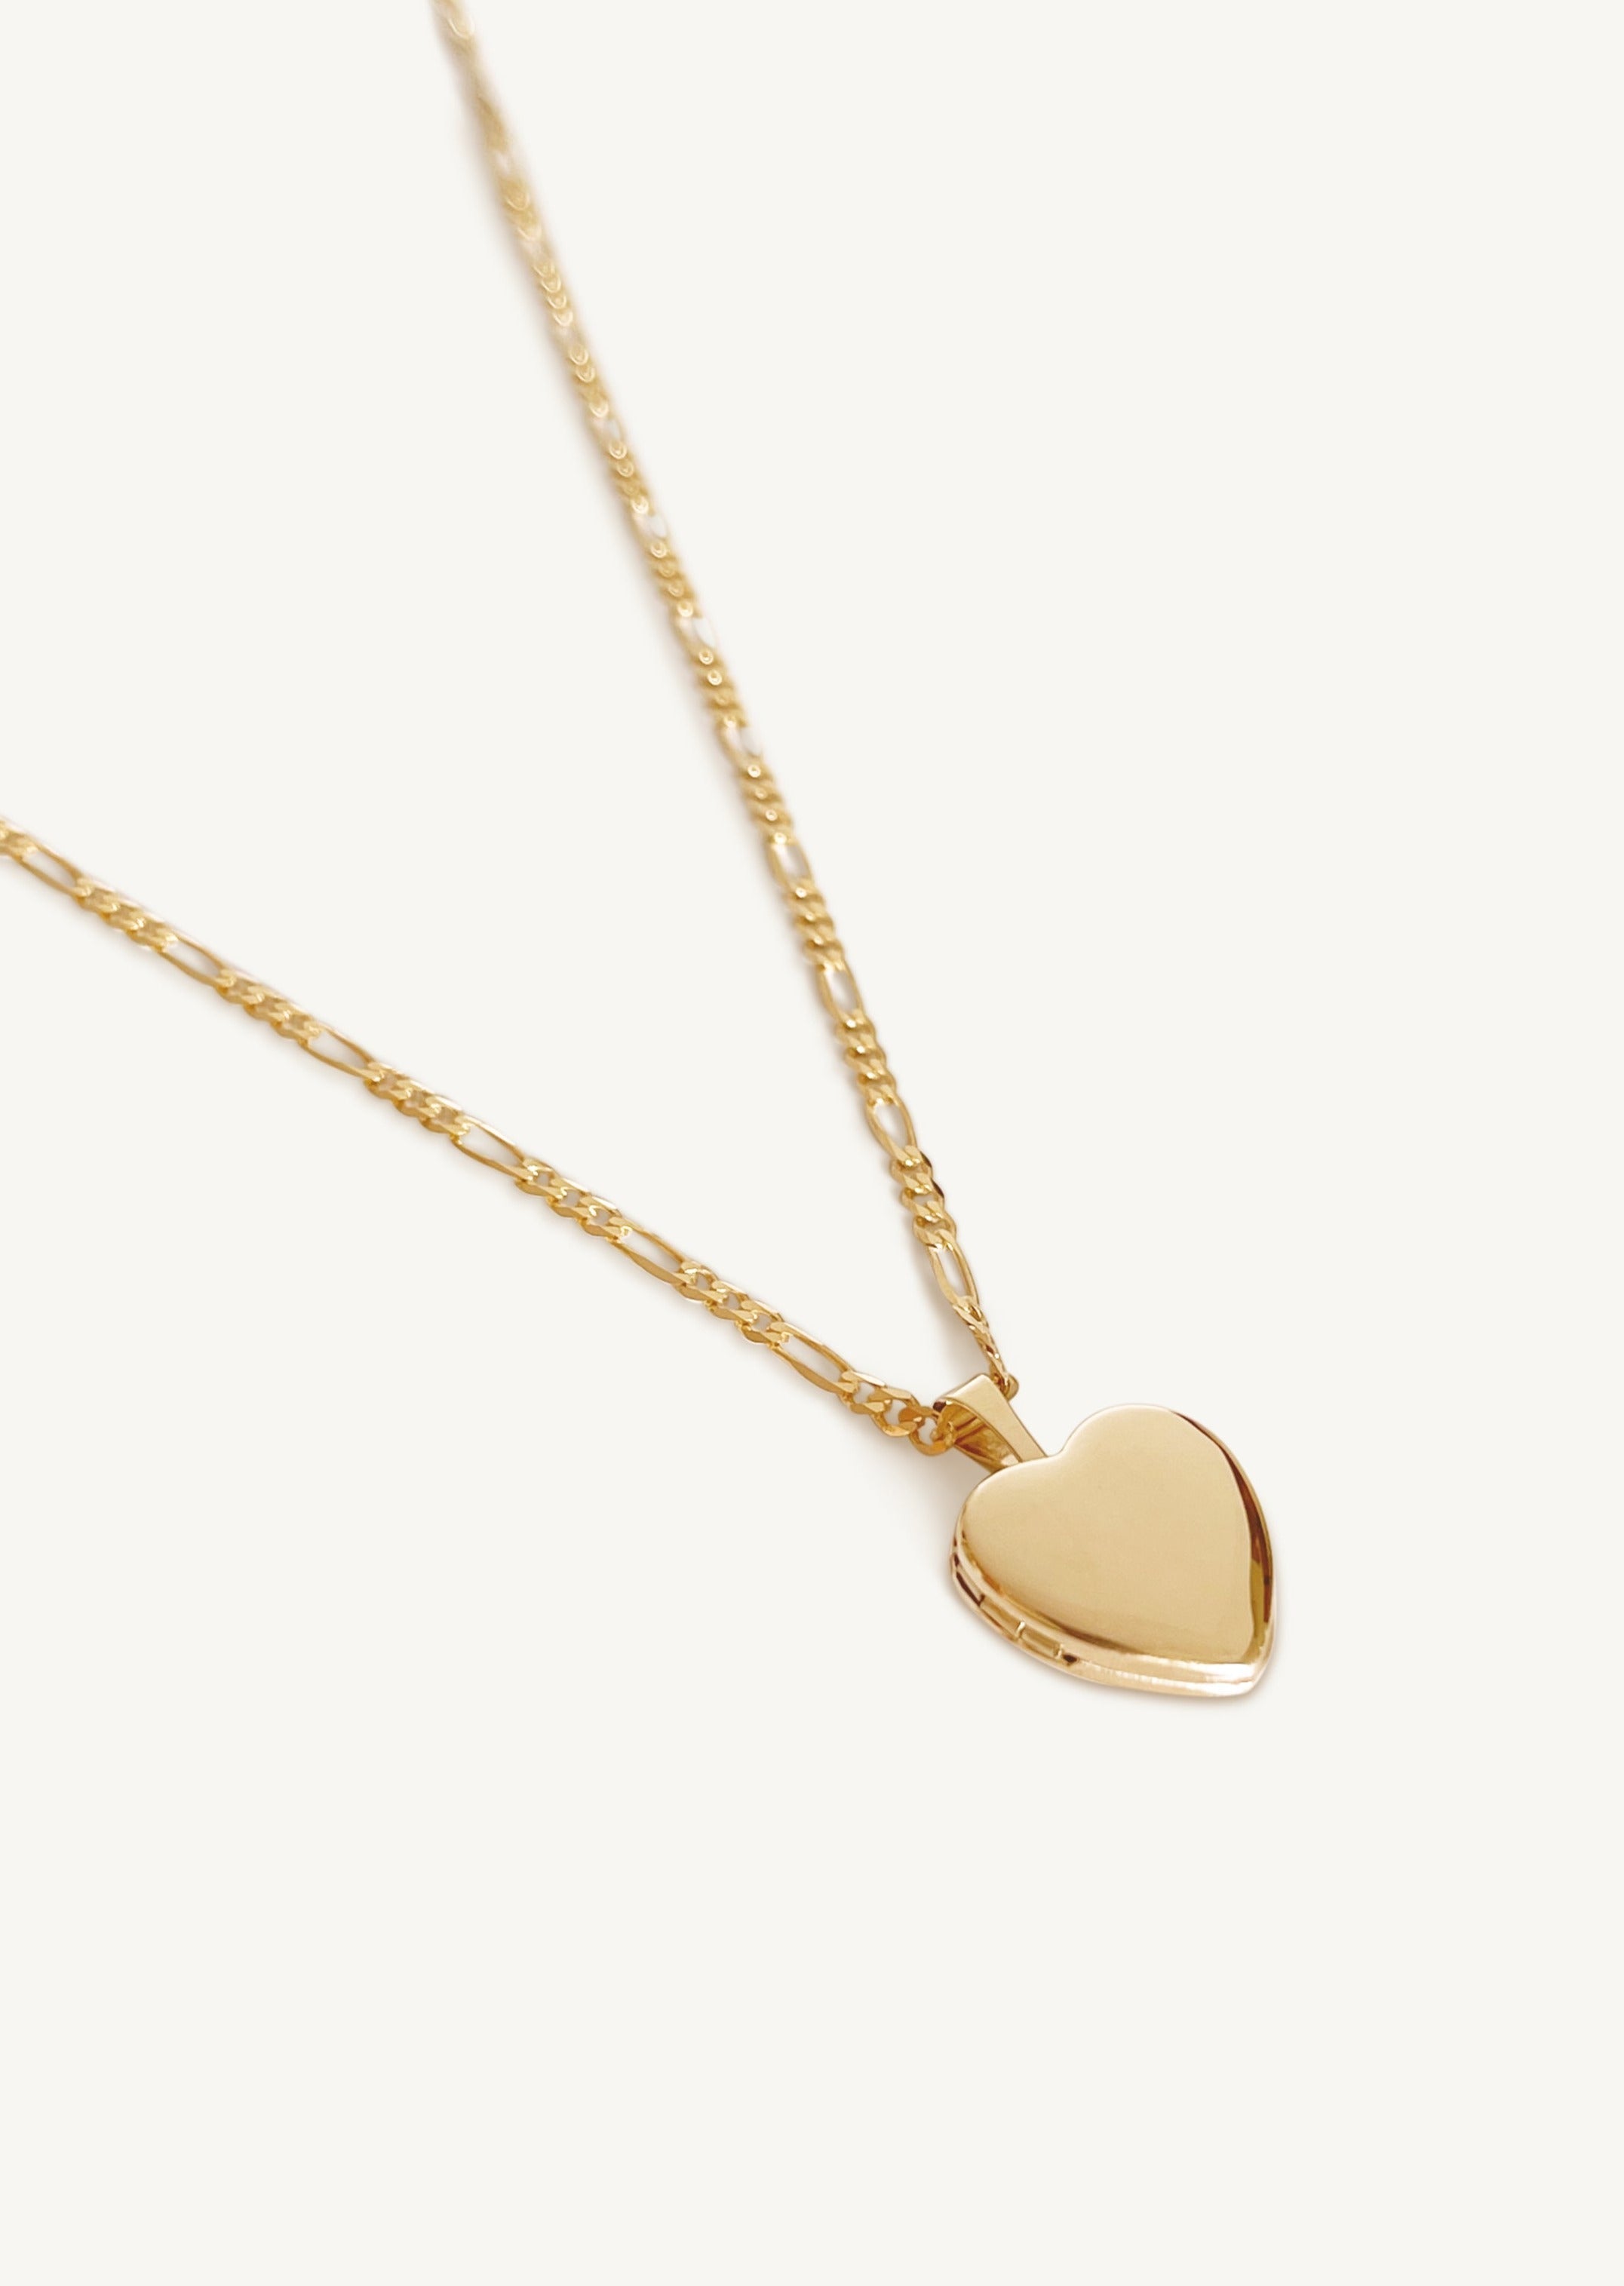 alt="Maison Heart Locket Necklace I with kyle figaro chain"